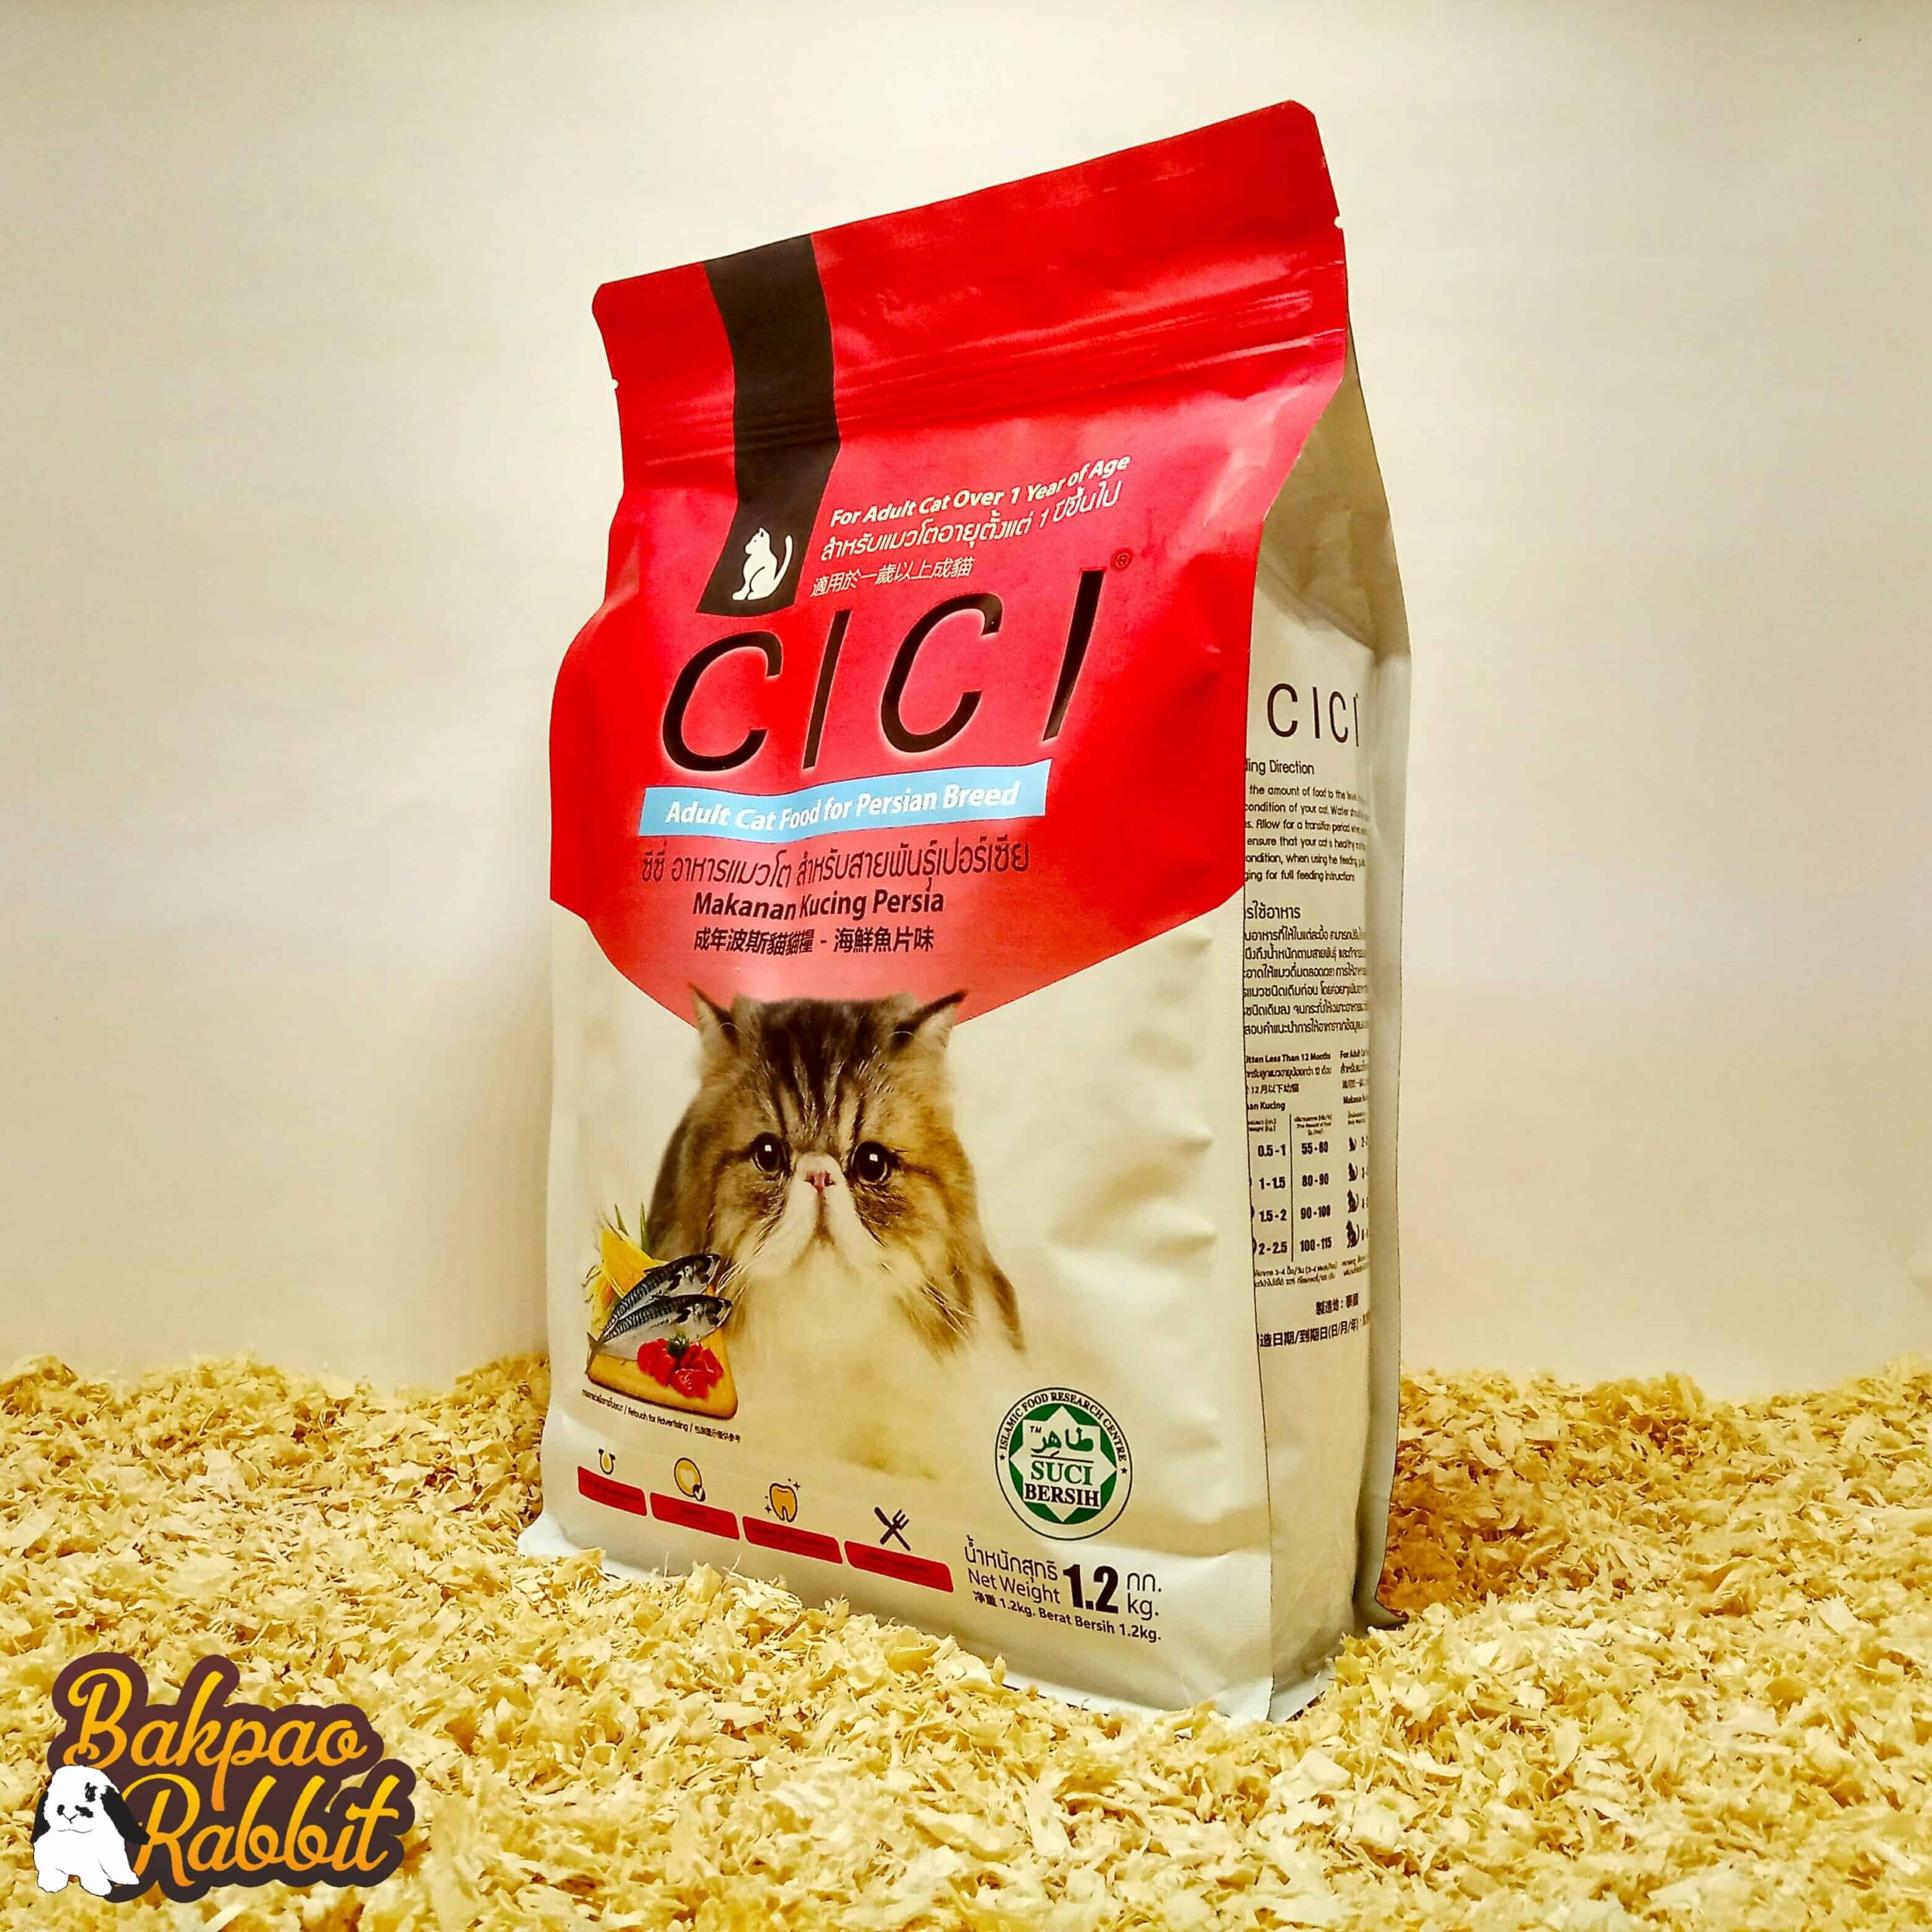 CICI Adult Cat Food for Persian Breed 1.2kg